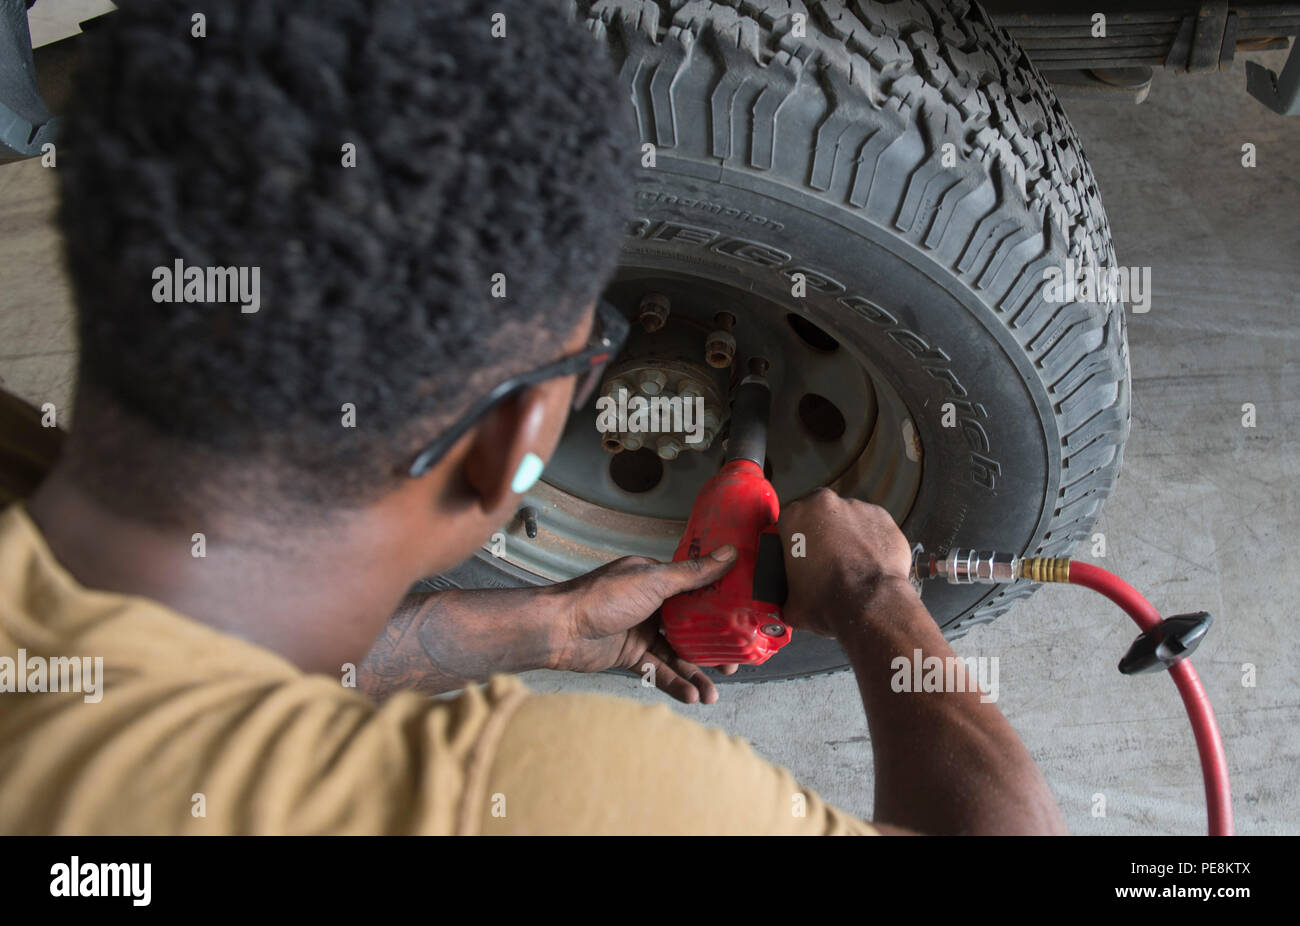 U.S. 5TH FLEET AREA OF OPERATIONS (Oct. 28, 2015) Constructionman Charles Tims, assigned to Commander, Task Group (CTG) 56.1, removes the lugnuts on a tire to check the brake pads on a truck during routine maintenance procedures in U.S. 5th Fleet area of operations Oct. 28, 2015. CTG 56.1 conducts mine countermeasures, explosive ordnance disposal, salvage-diving, and force protection operations throughout the U.S. 5th Fleet area of operations. (U.S. Navy photo by Mass Communication Specialist 2nd Class Shannon Burns/Released) Stock Photo